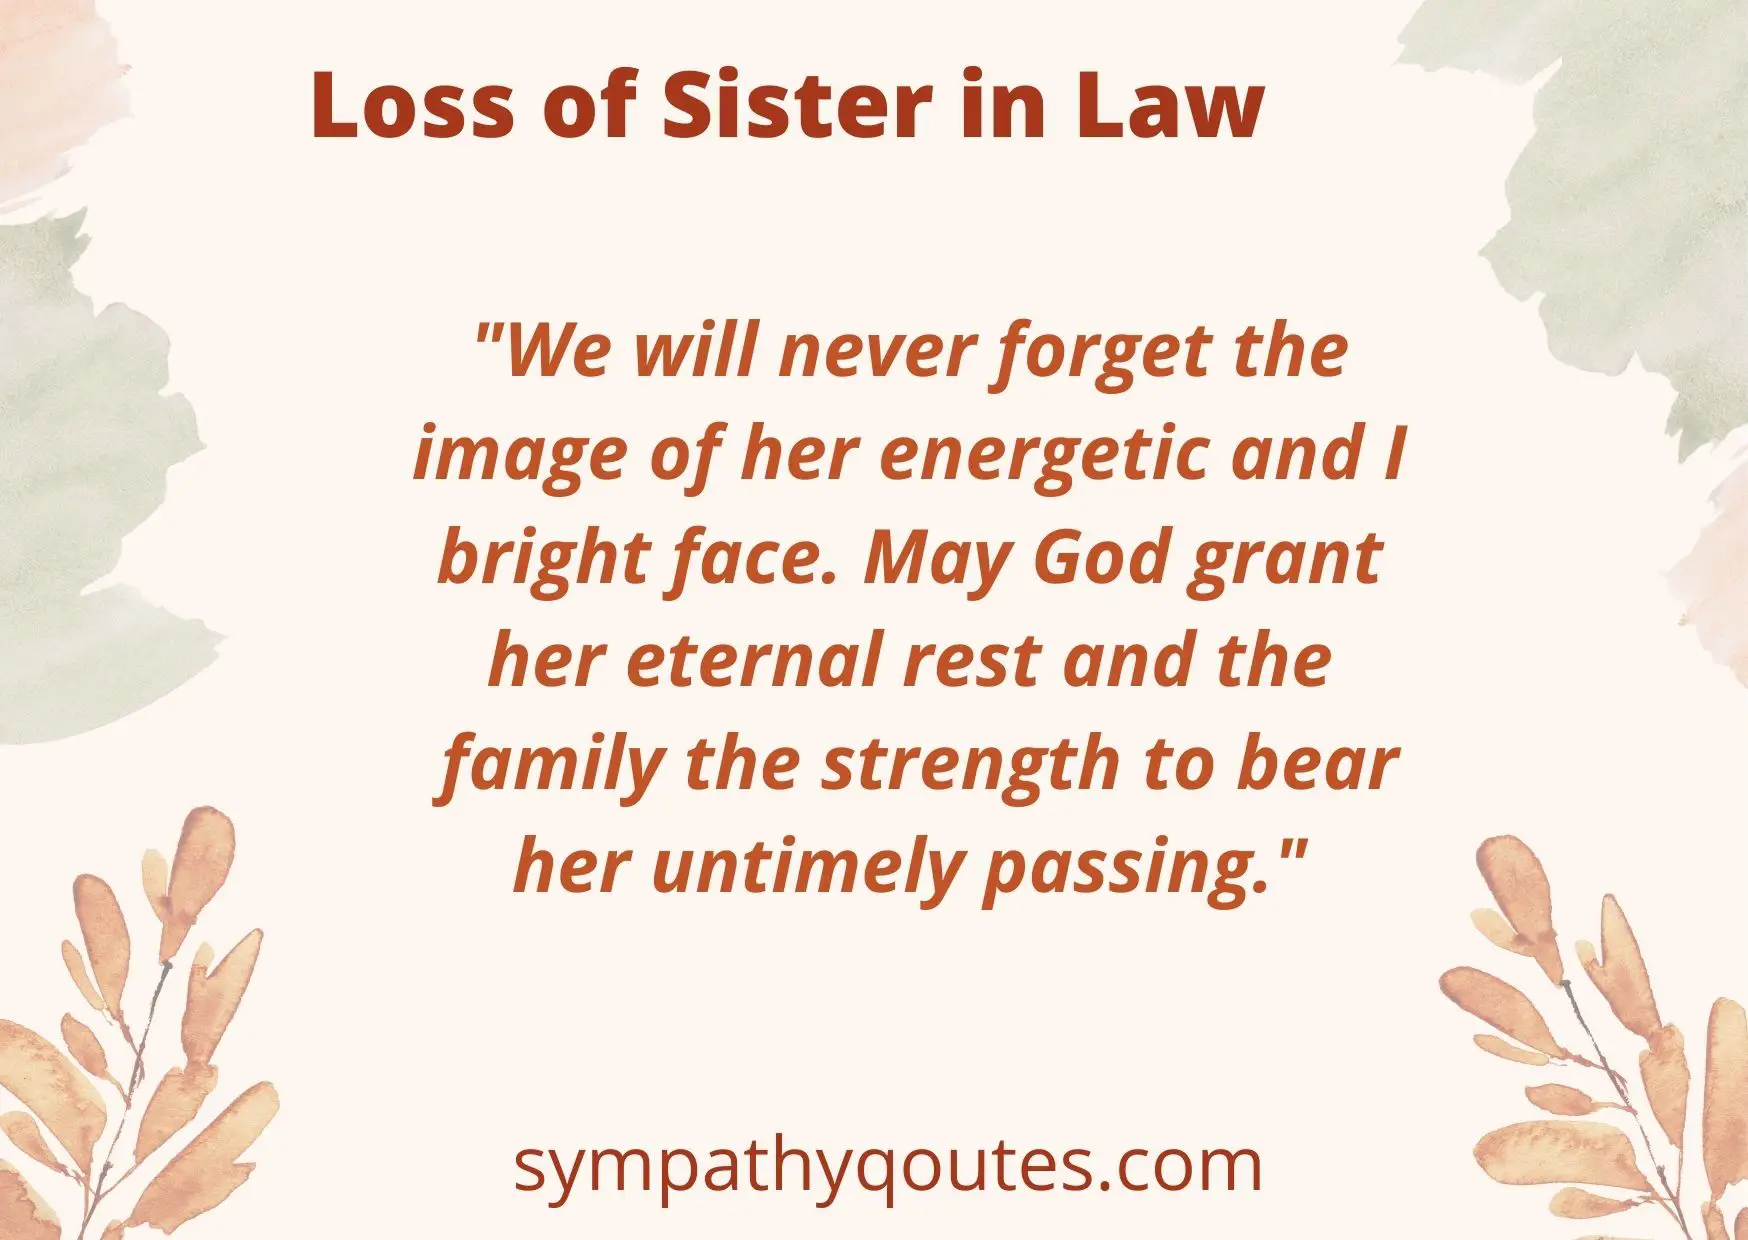  Sympathy Messages for Loss of Sister in Law